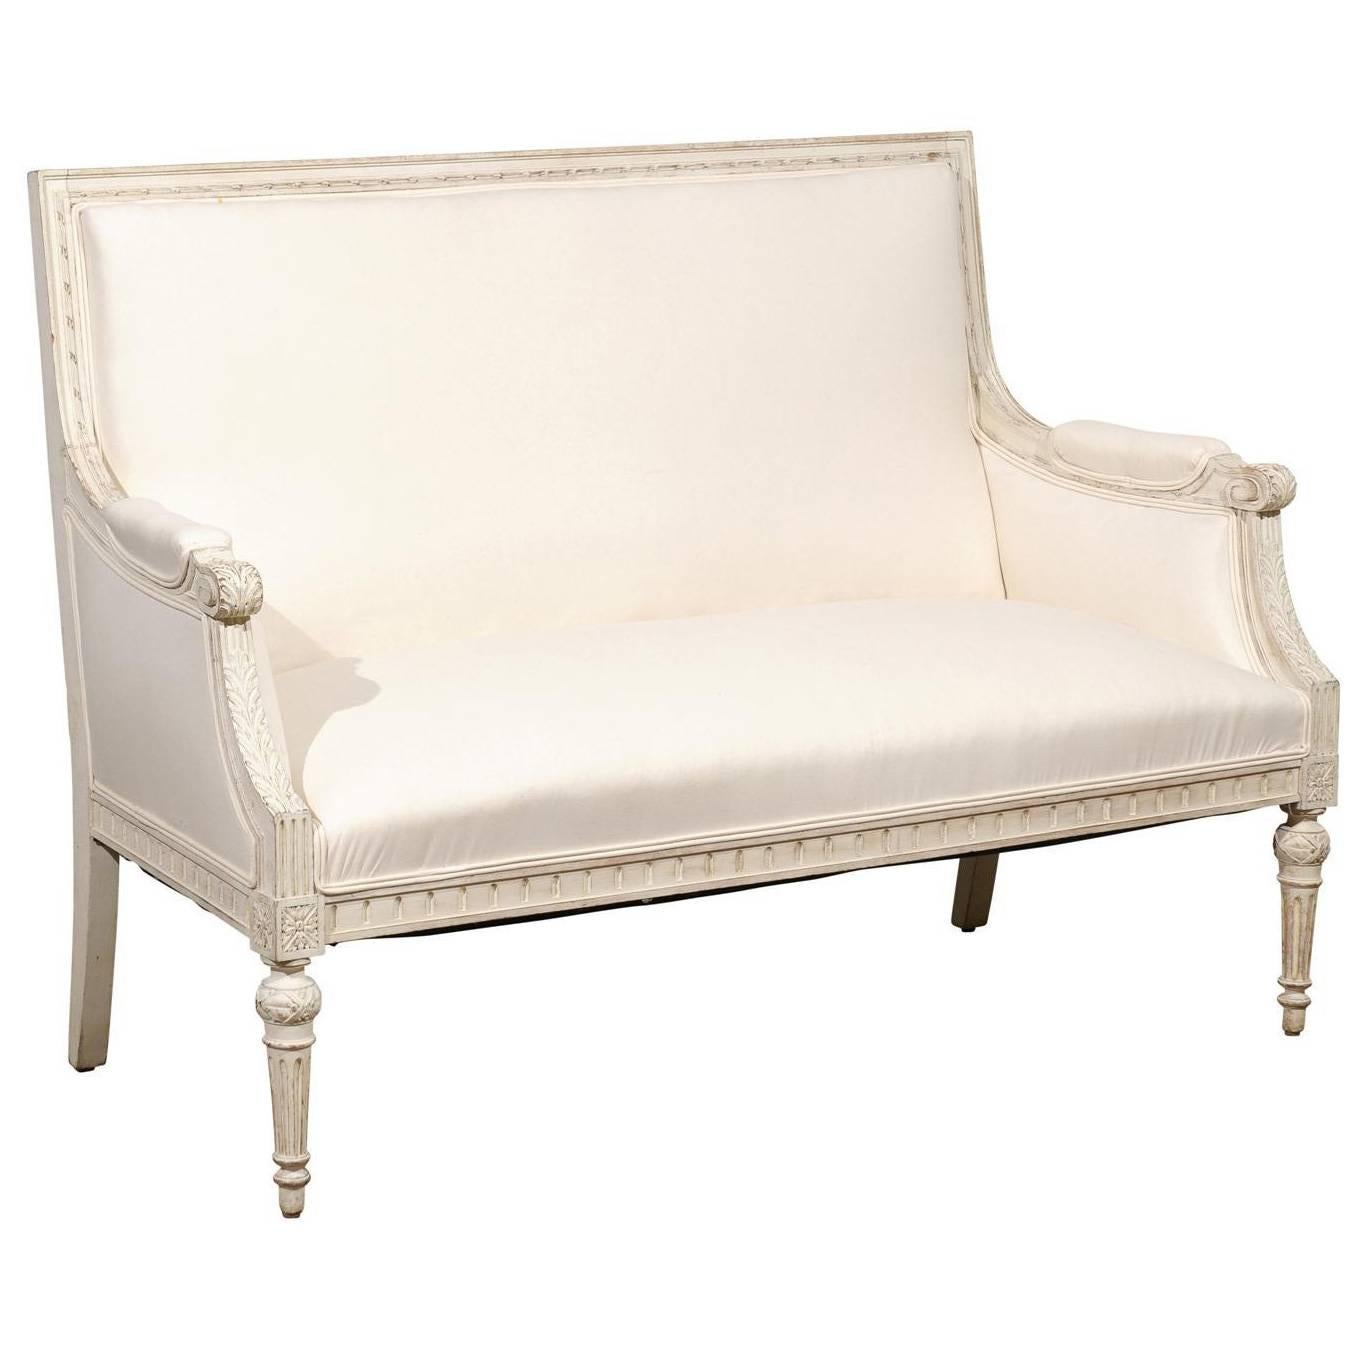 Swedish Neoclassical Revival Two-Seat Carved and Painted Sofa, circa 1880